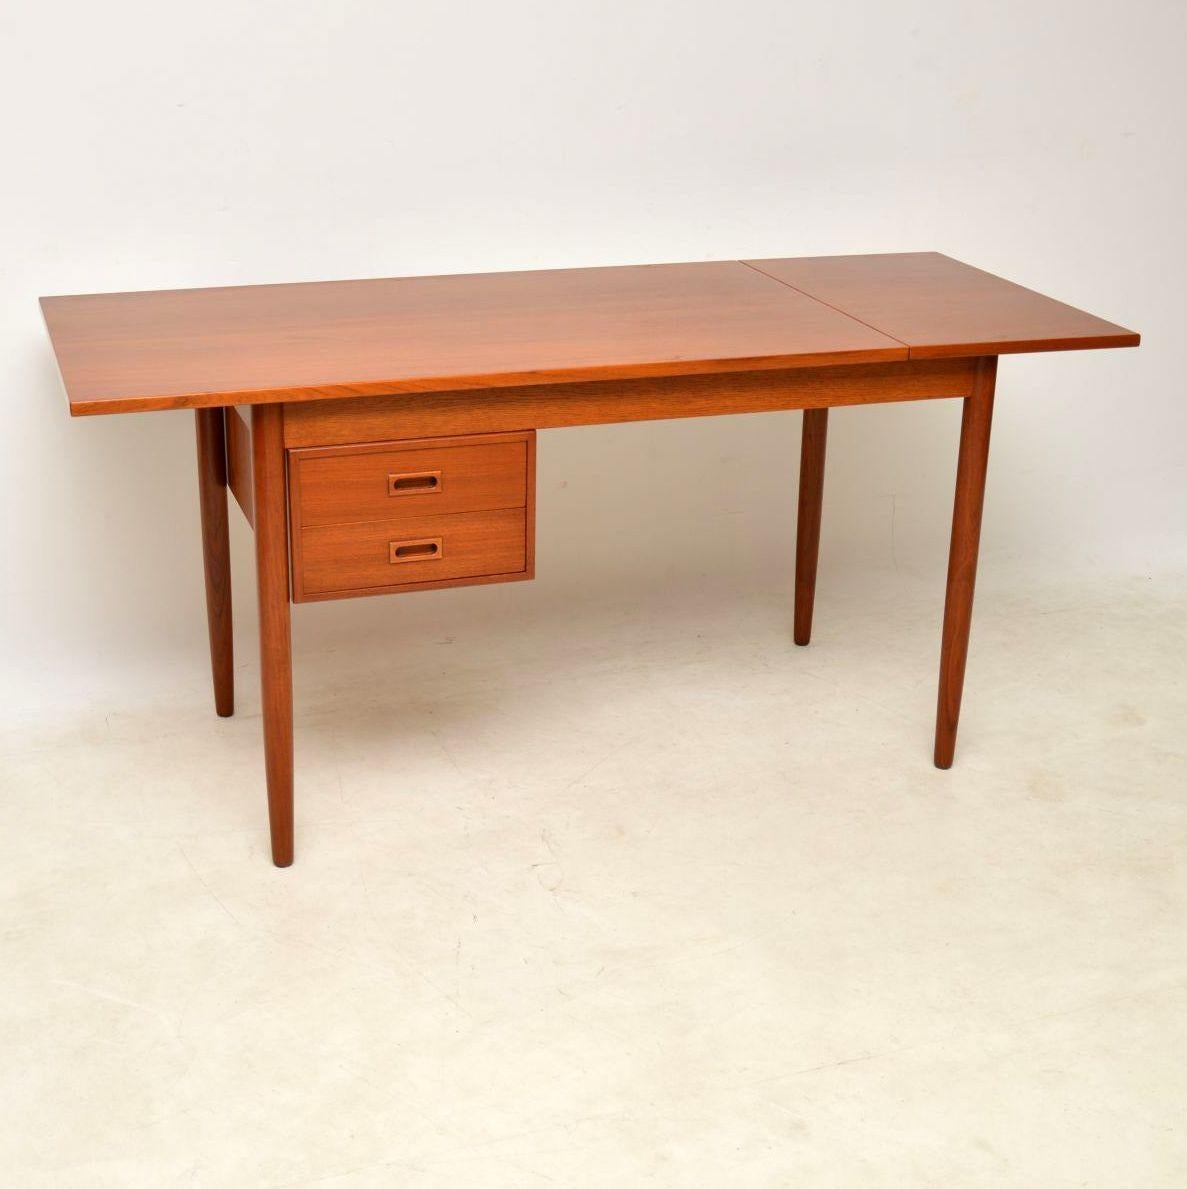 A stylish and extremely well made vintage teak desk, this was made in Denmark, it dates from the 1960s. We have had this fully stripped and re-polished to a very high standard, the condition is superb throughout. The drop down leaf lifts up and can